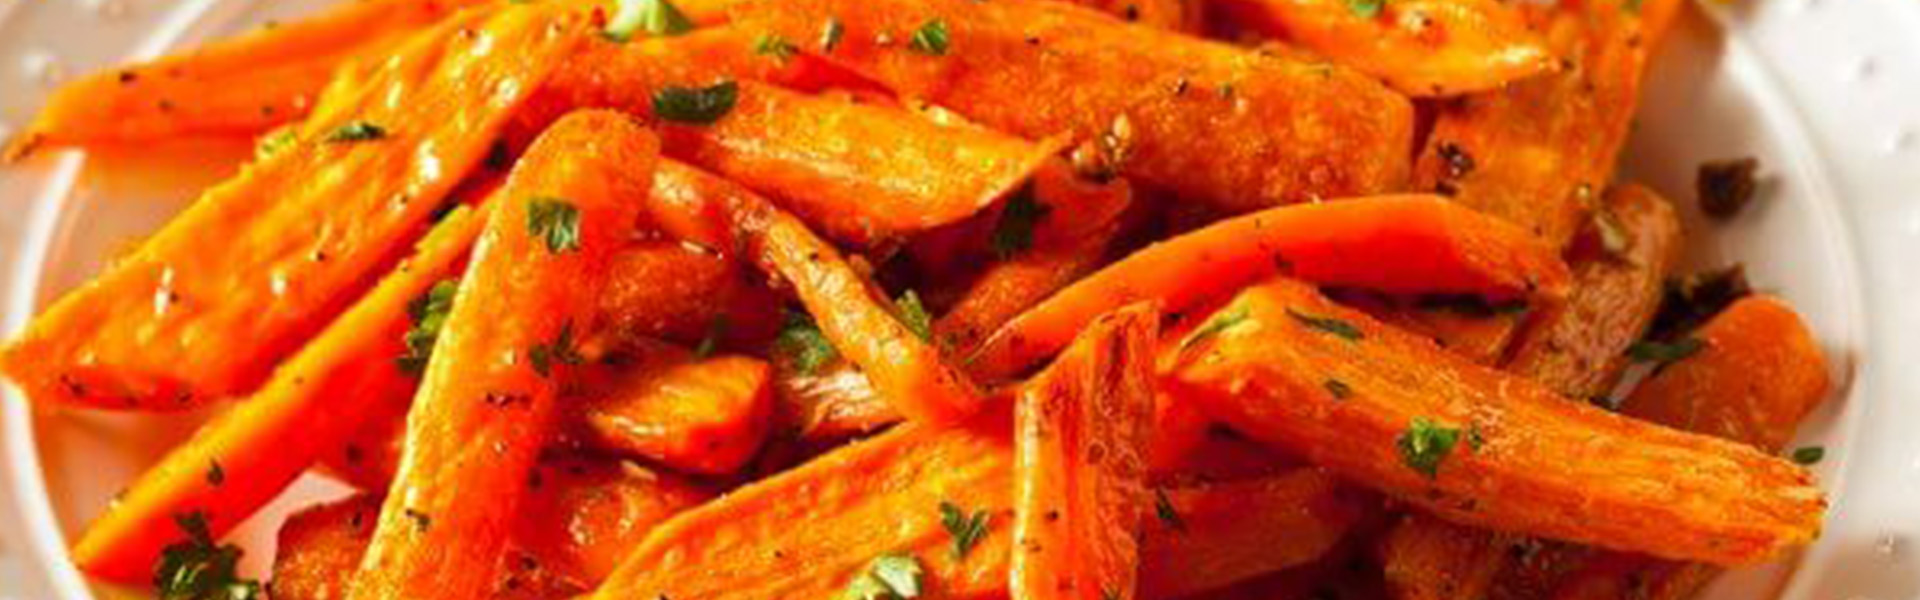 Roasted Carrot